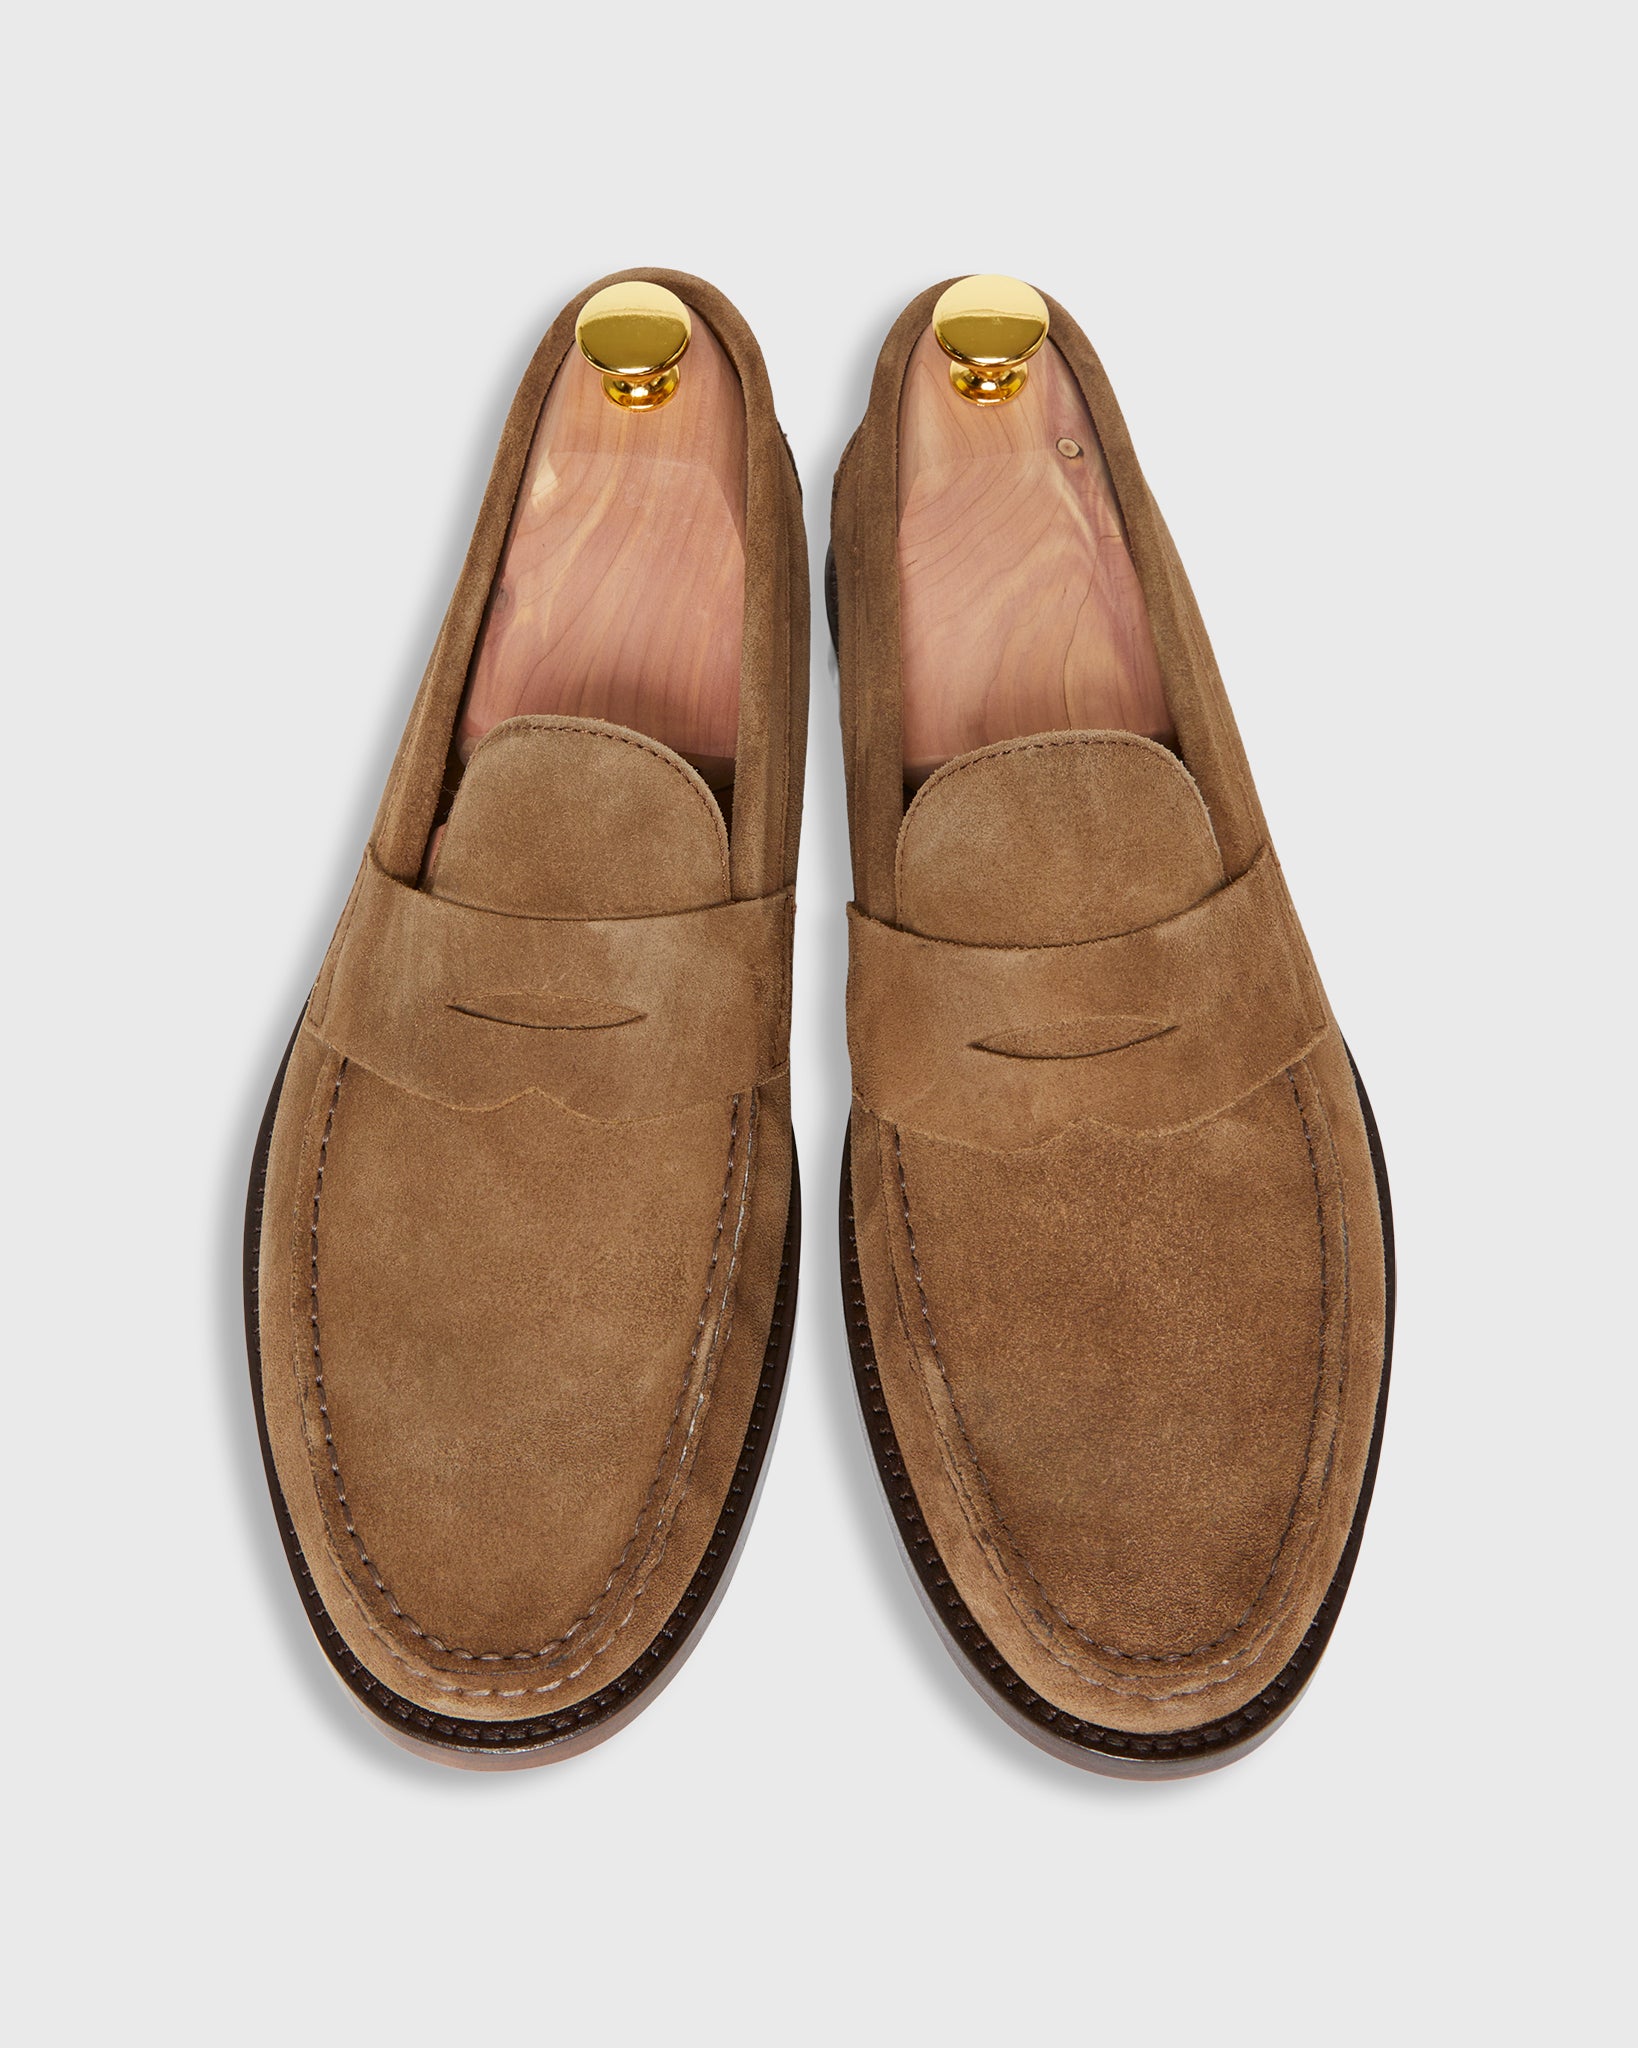 Handsewn Penny Loafer in Cigar Suede